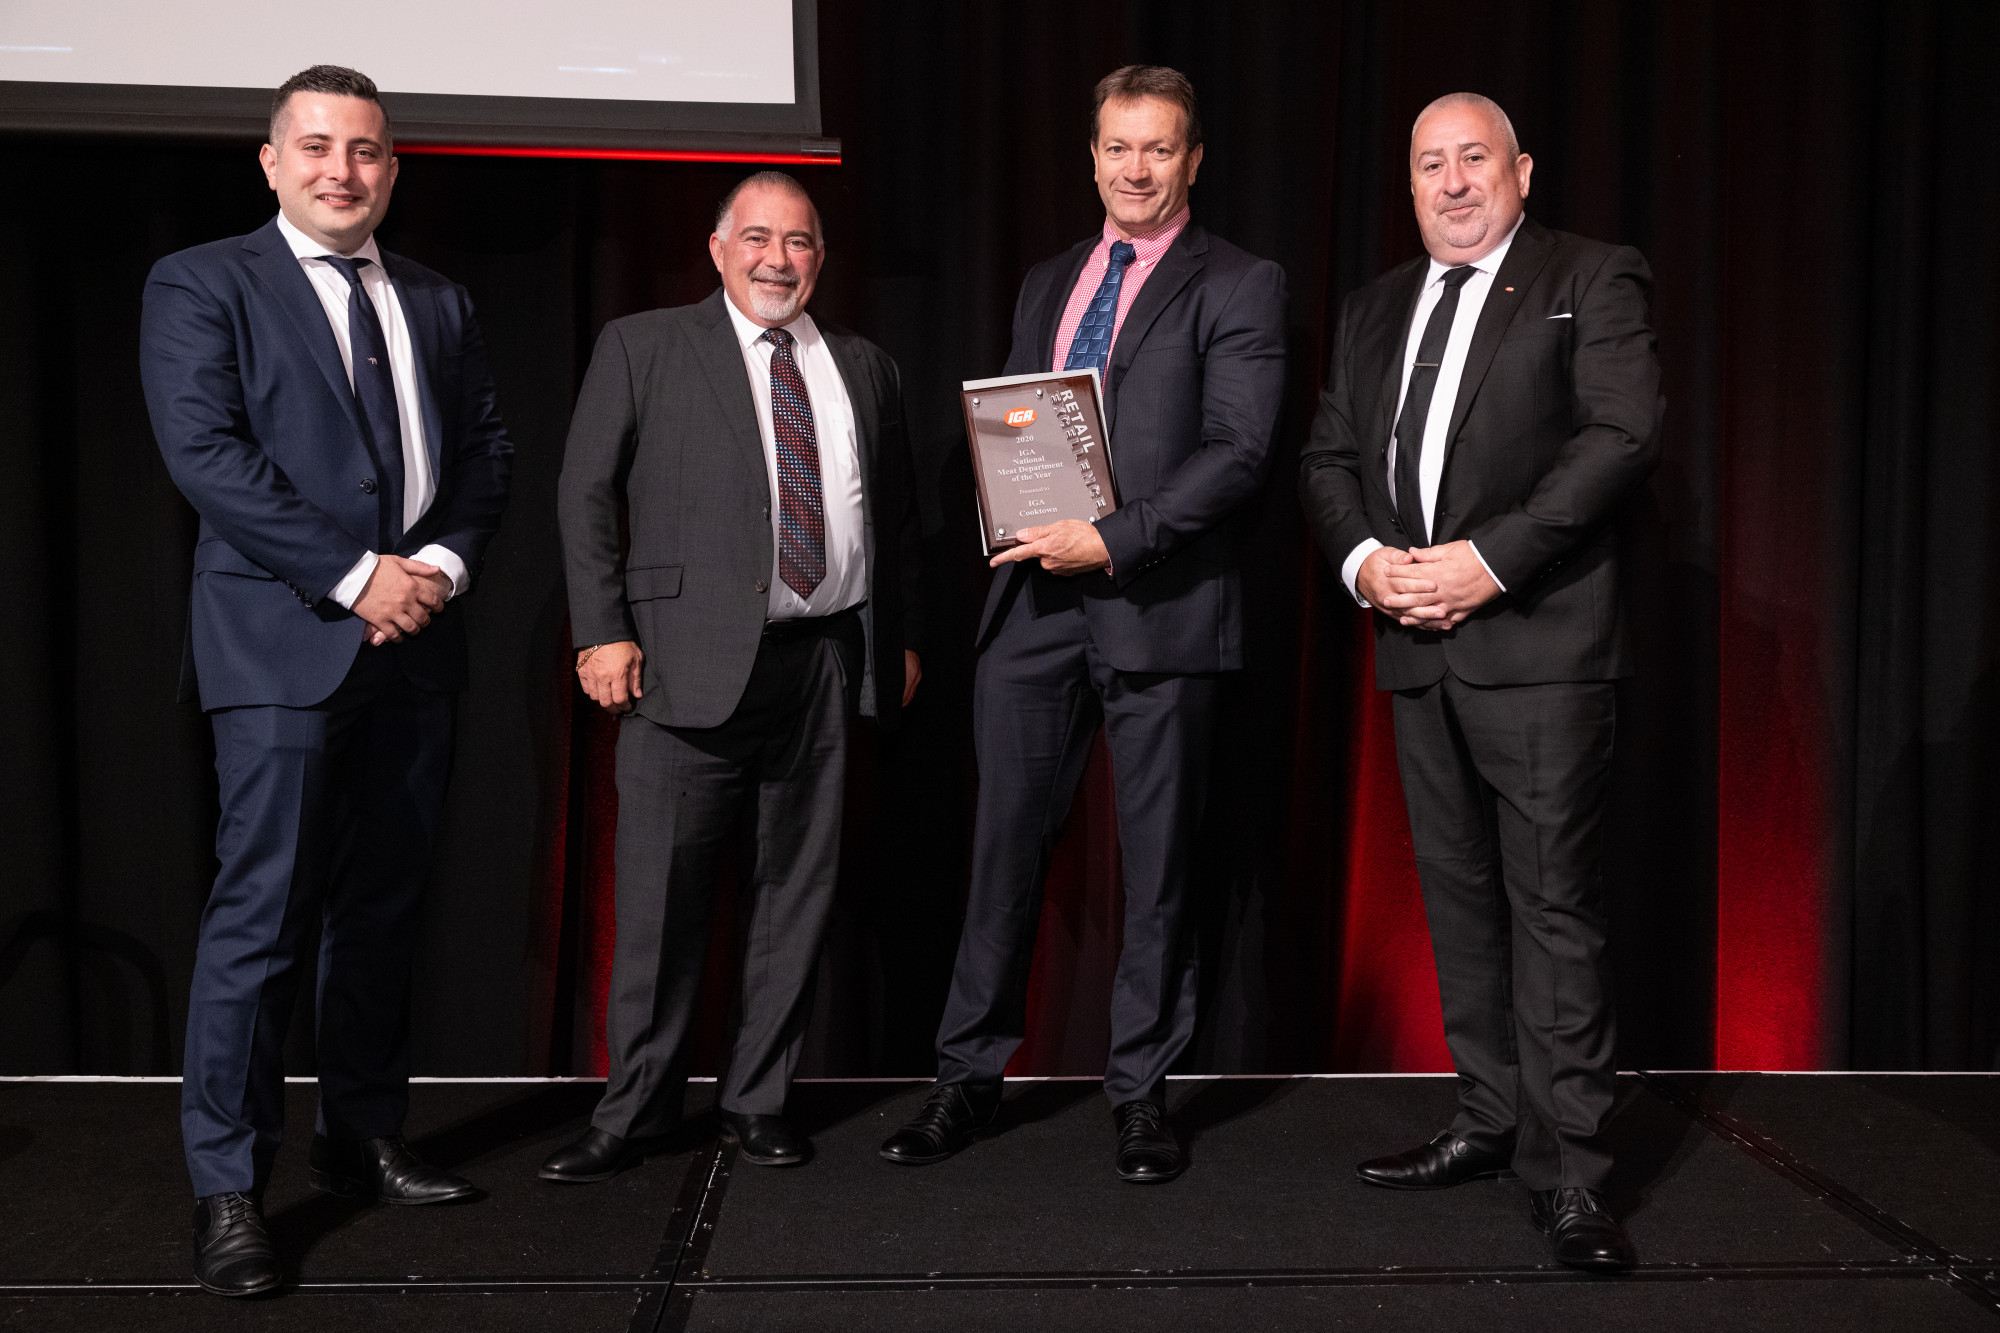 IGA Cooktown recently beat out hundreds of other IGA stores across the country receiving the IGA Meat Department of the Year award at their ceremony held in November.